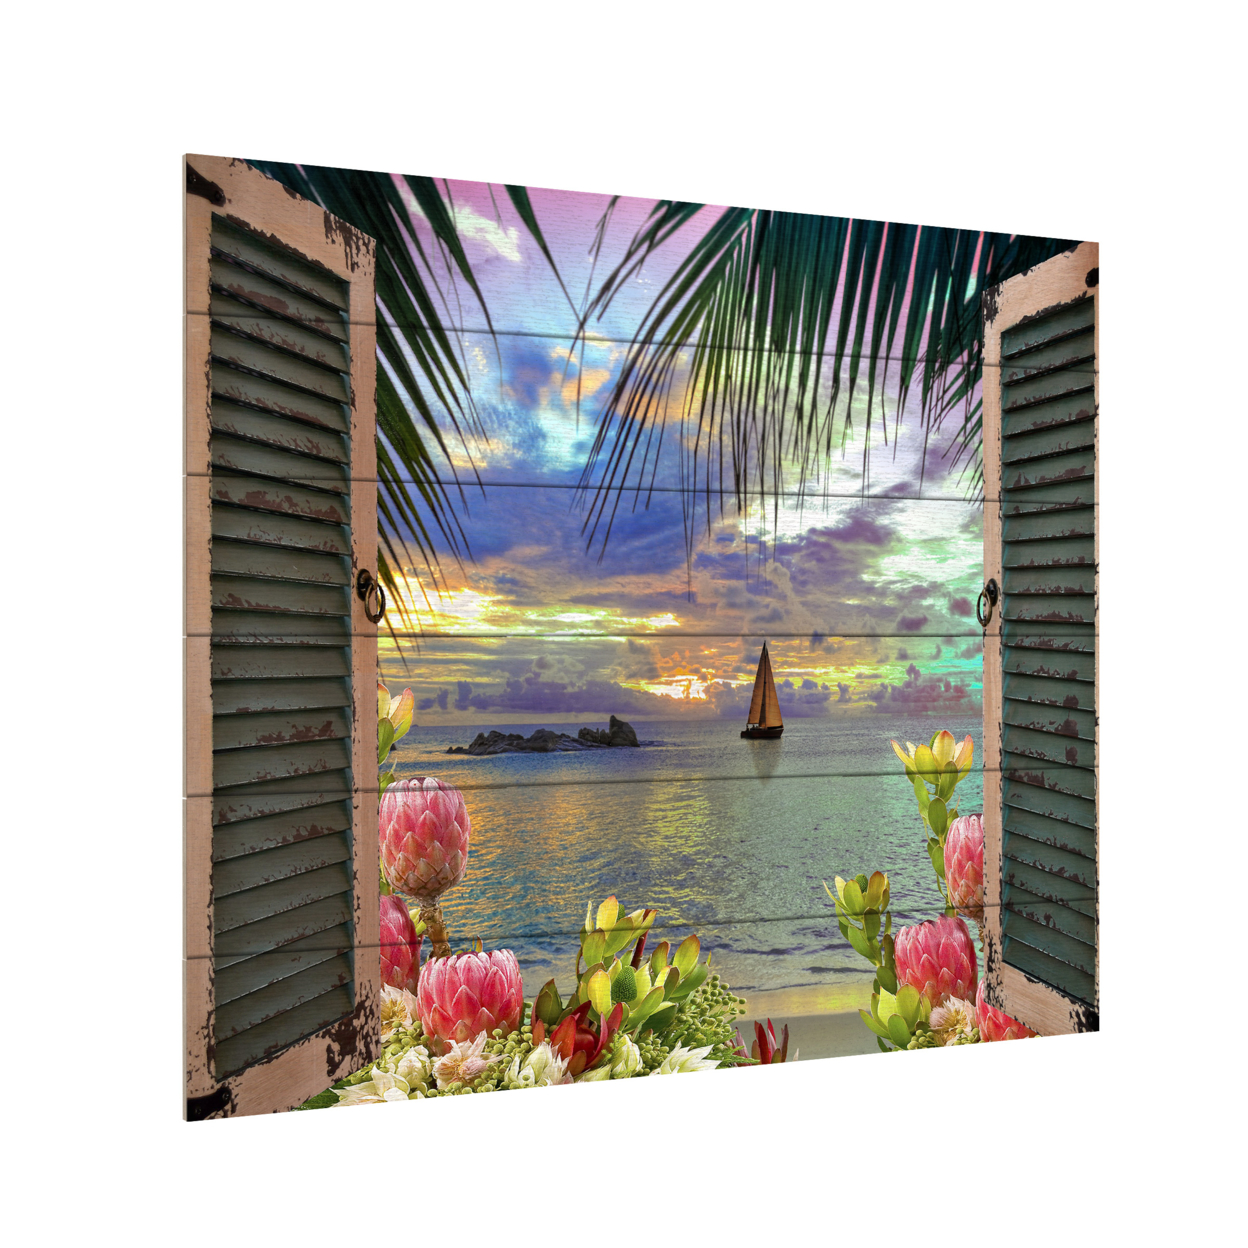 Wooden Slat Art 18 X 22 Inches Titled Window To Paradise III Ready To Hang Home Decor Picture